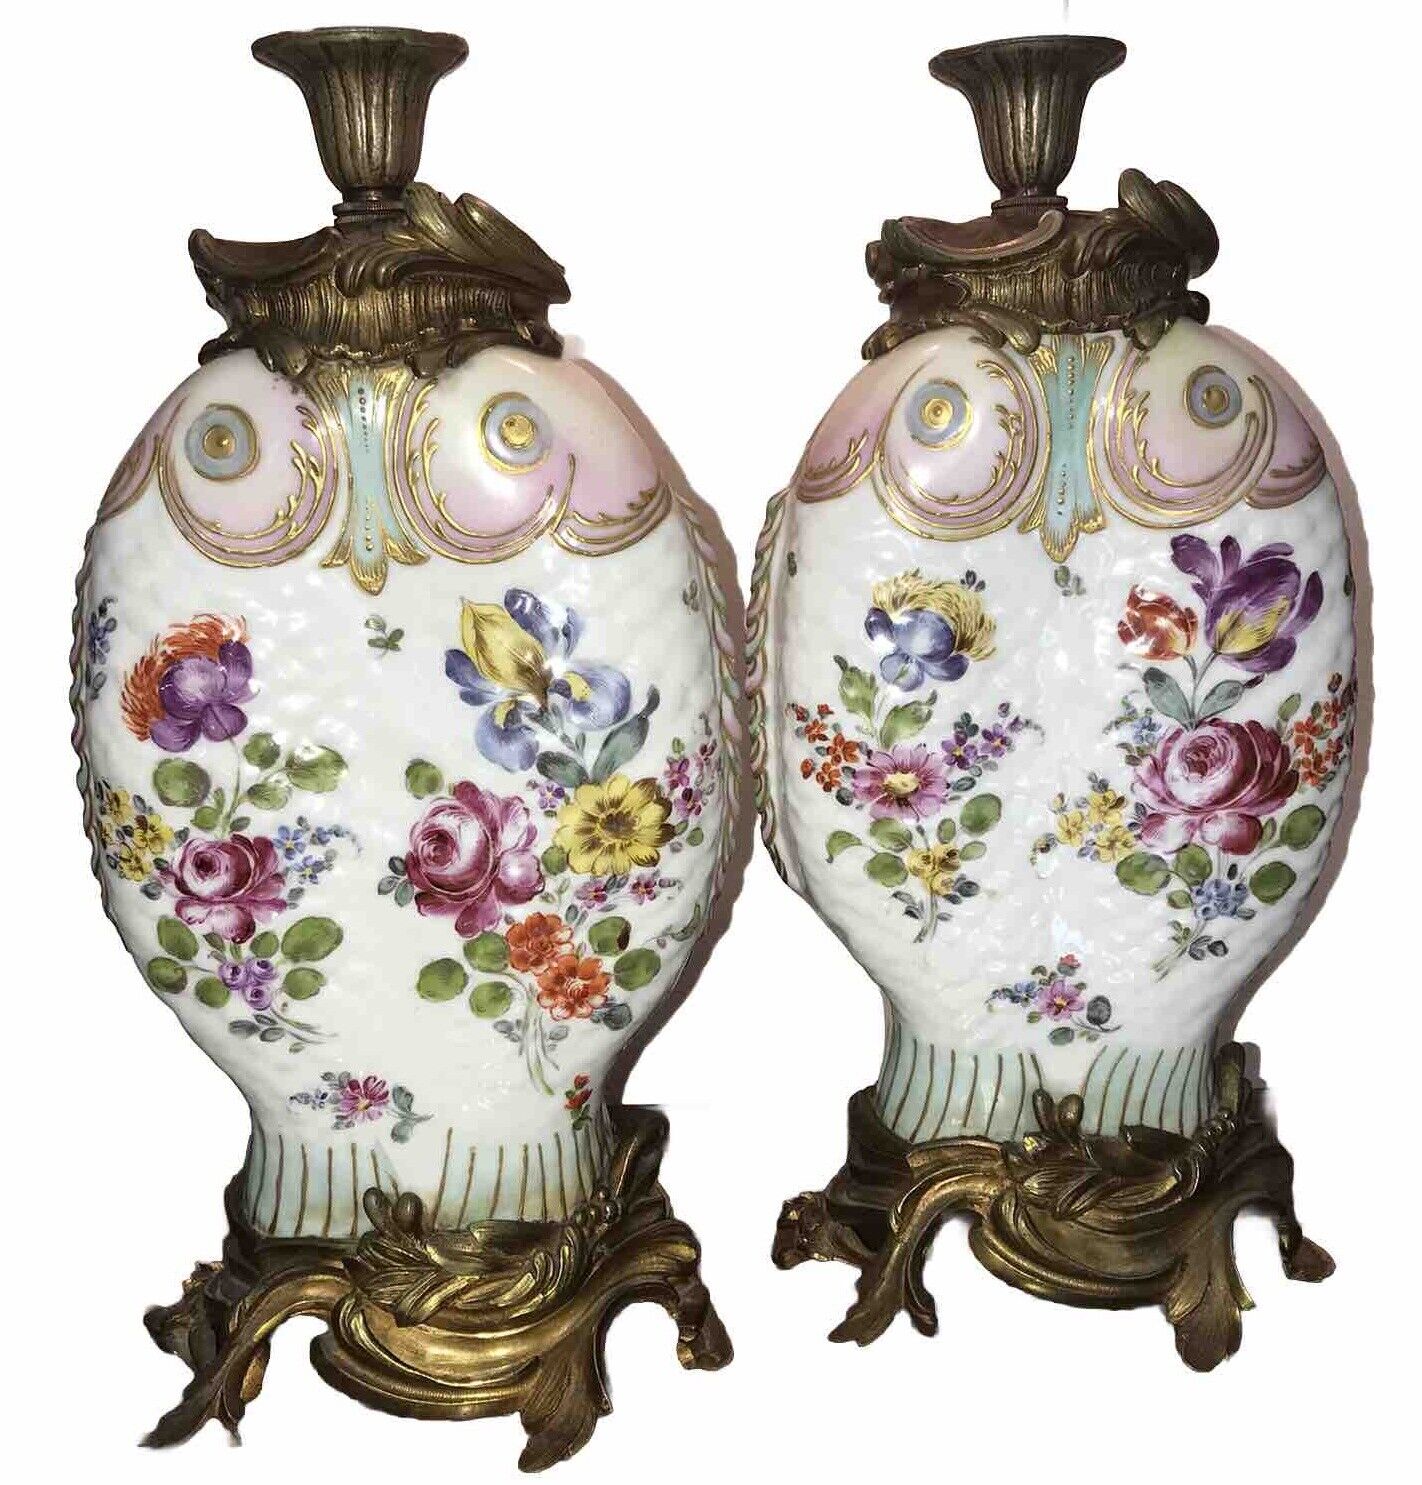 Antique Porcelain Floral Lamps with Hidden Fish Form - Exquisite and Intriguing